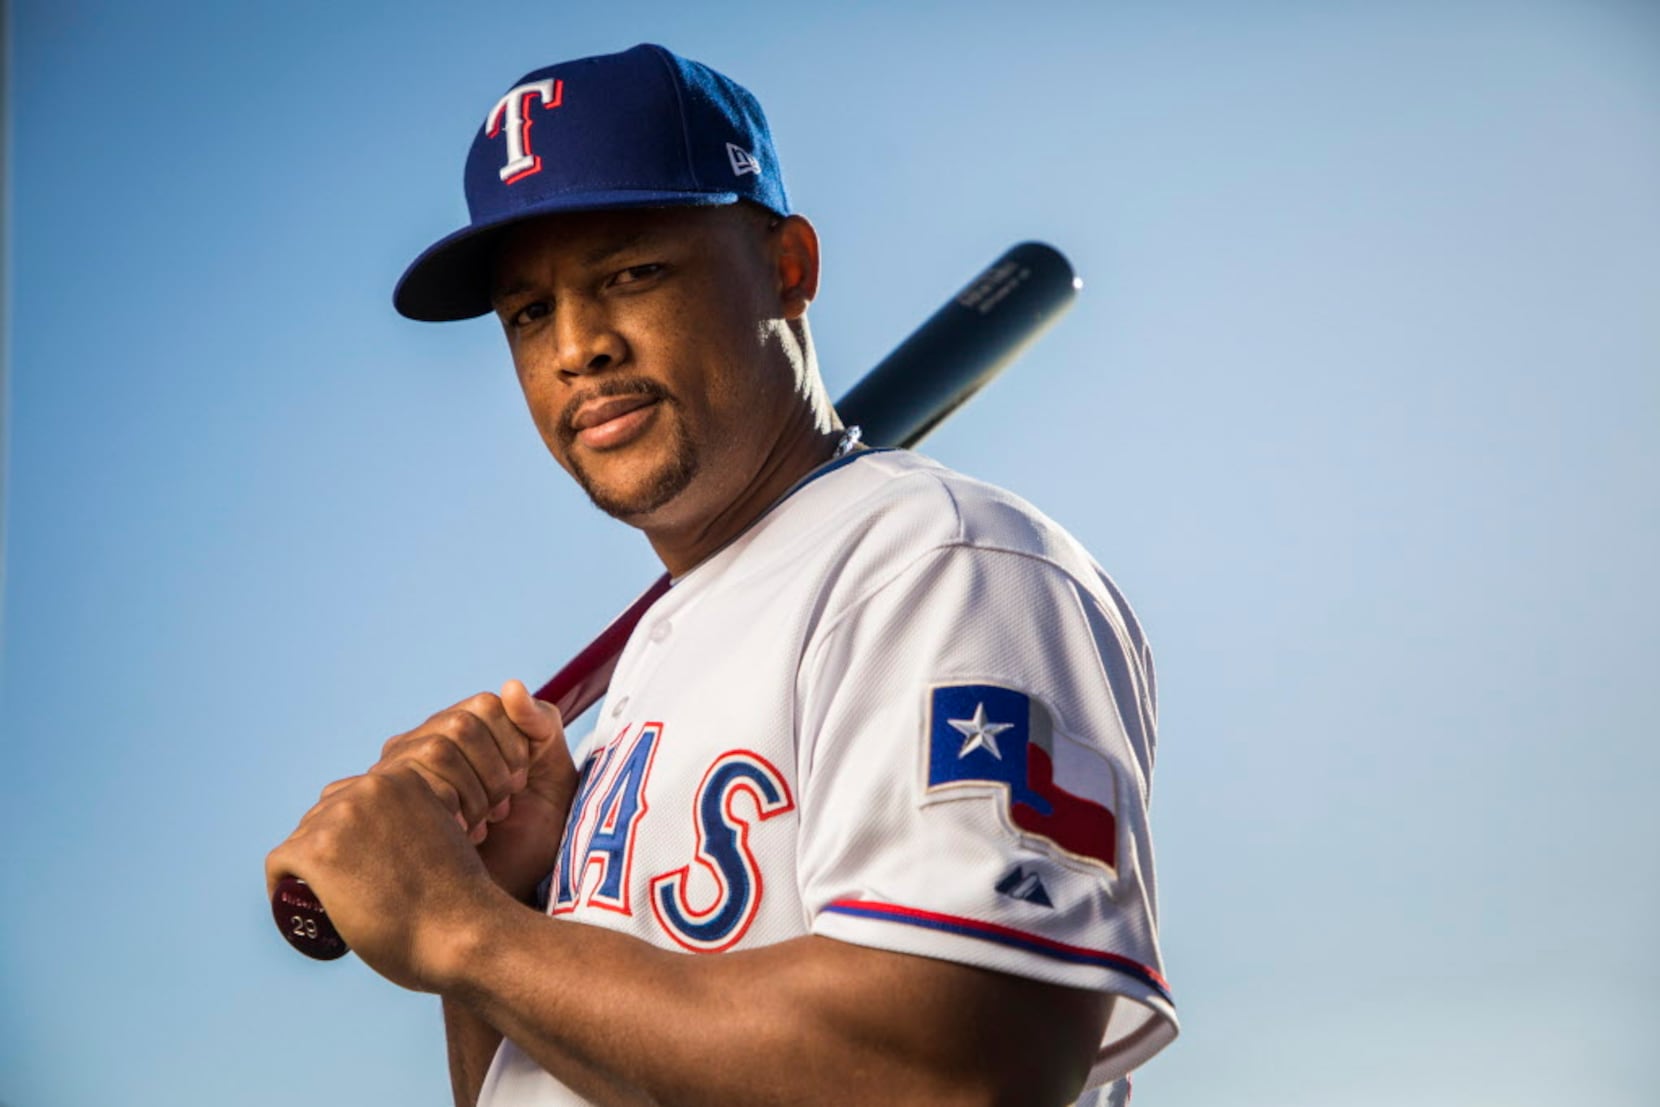 One Texas Rangers player breaks into the top 20 in MLB jersey sales